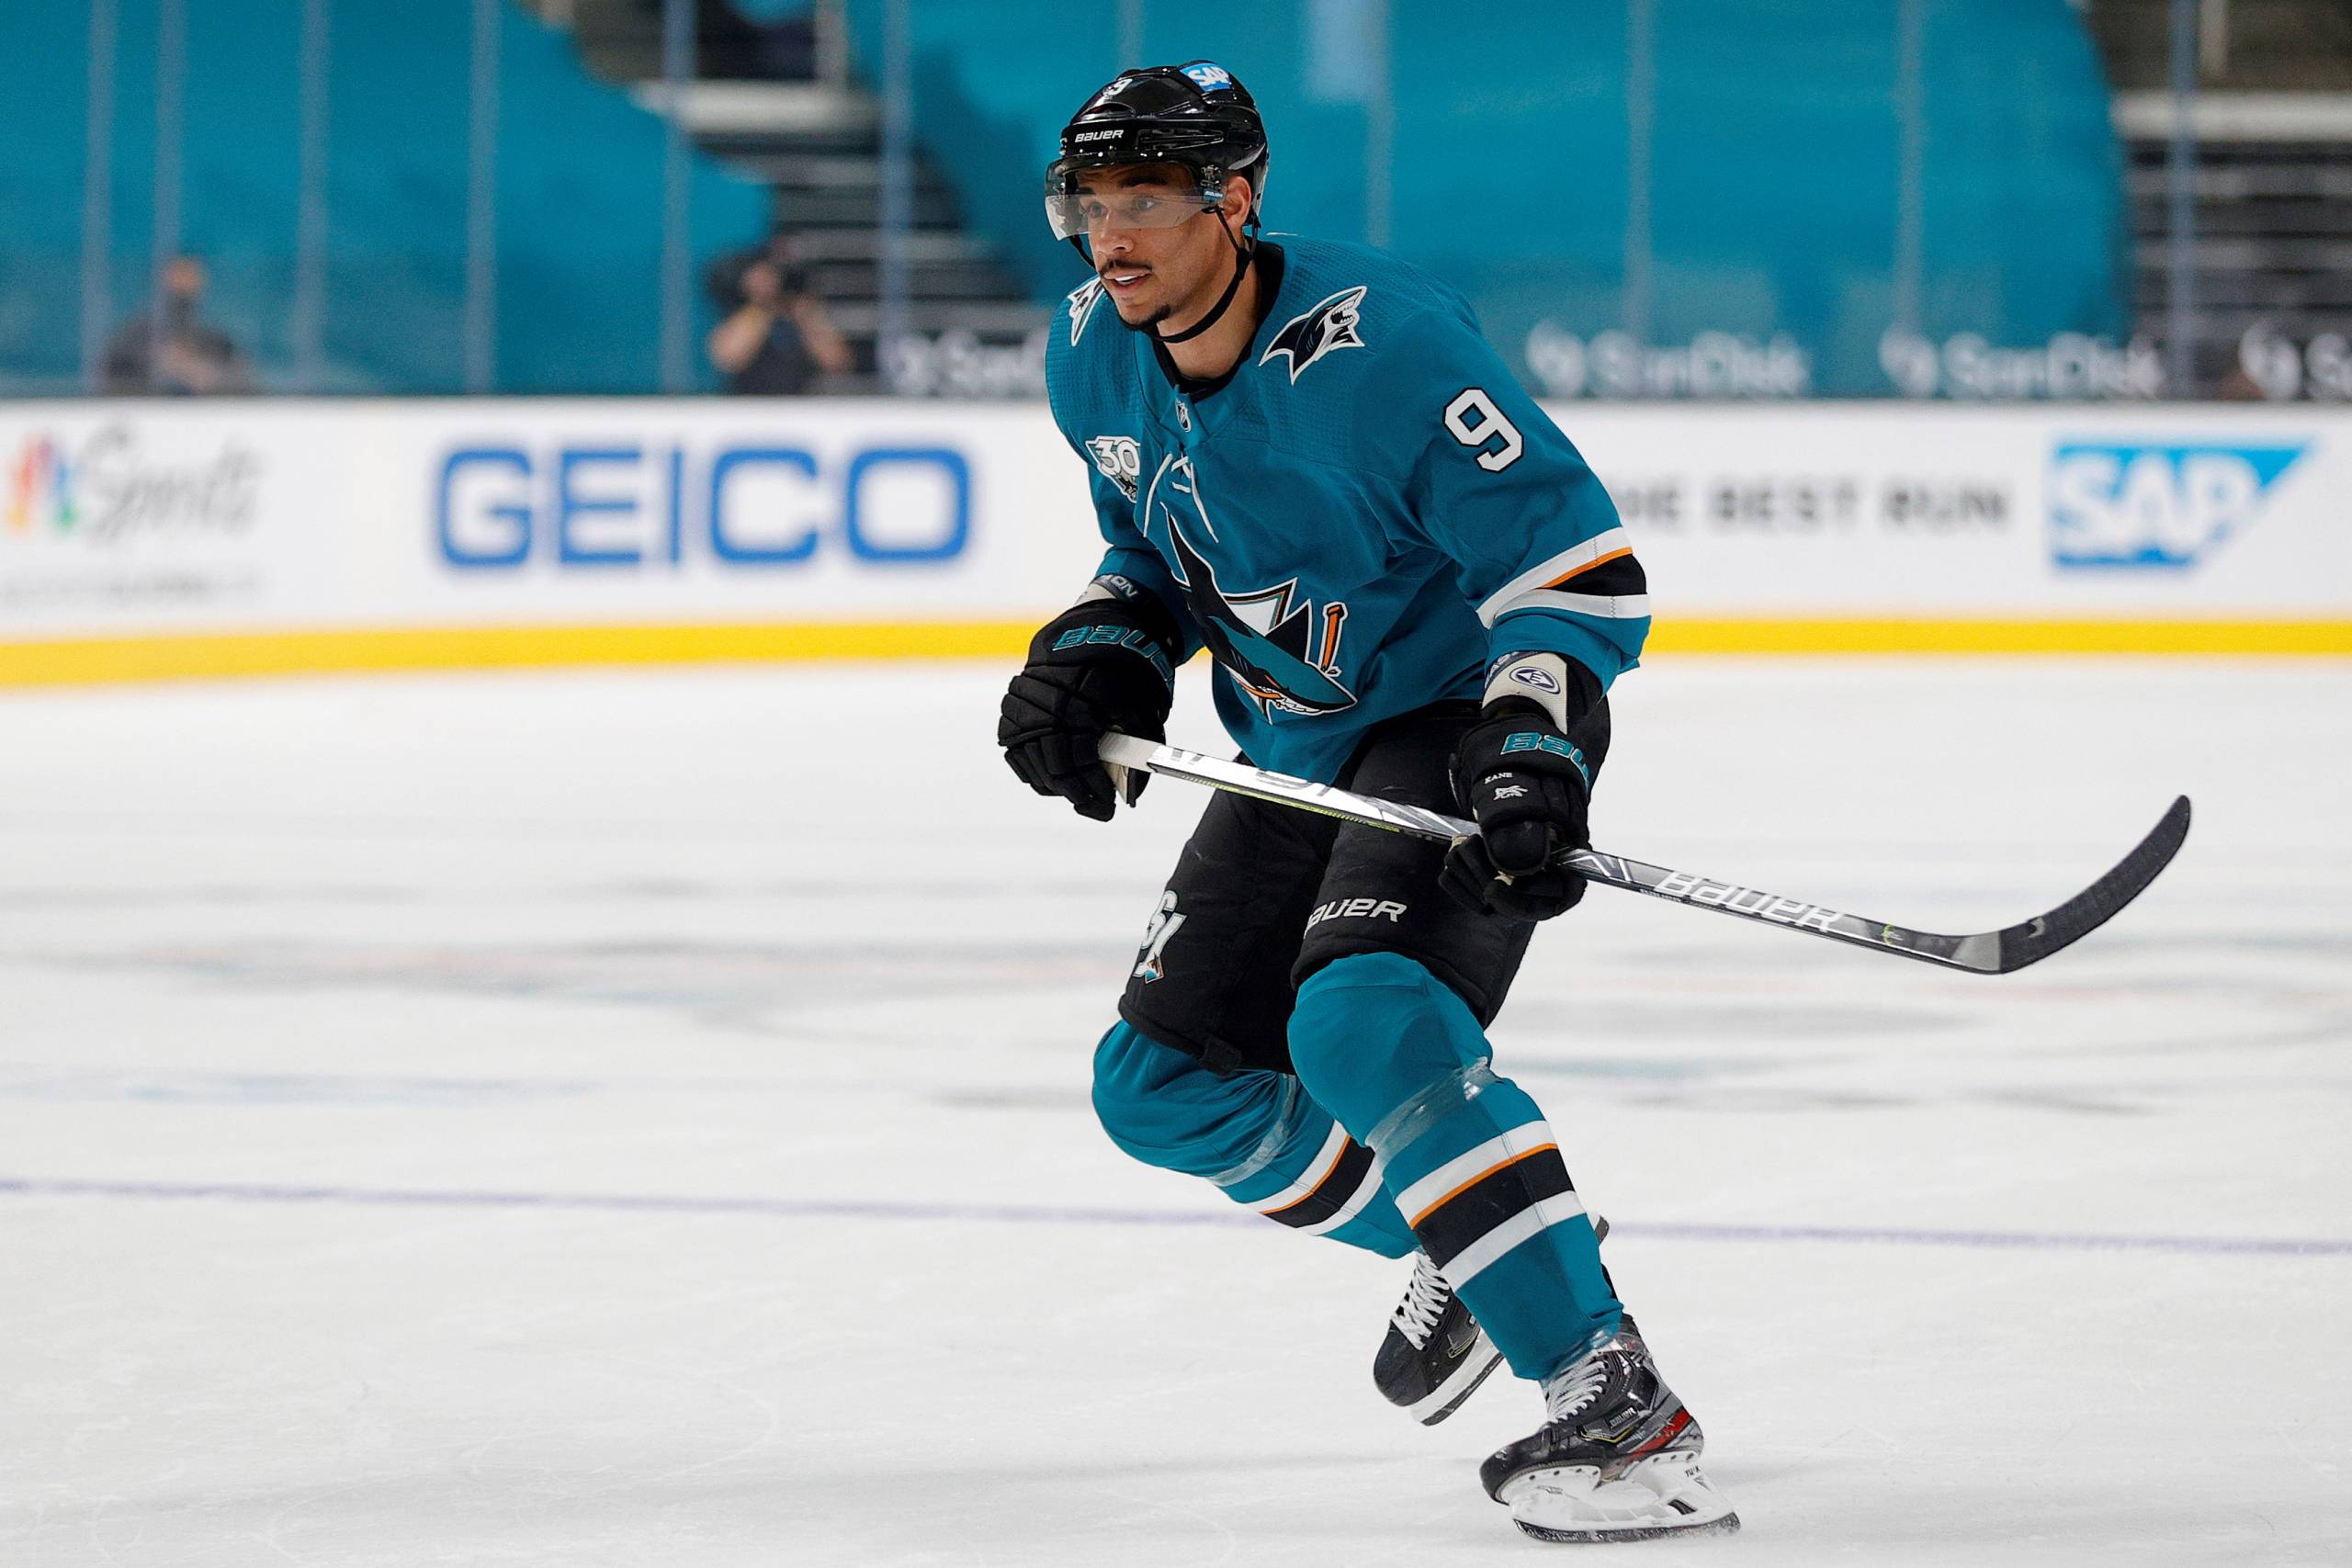 Evander Kane skates on the ice rink and wears a Sharks jersey and holds his hockey stick.